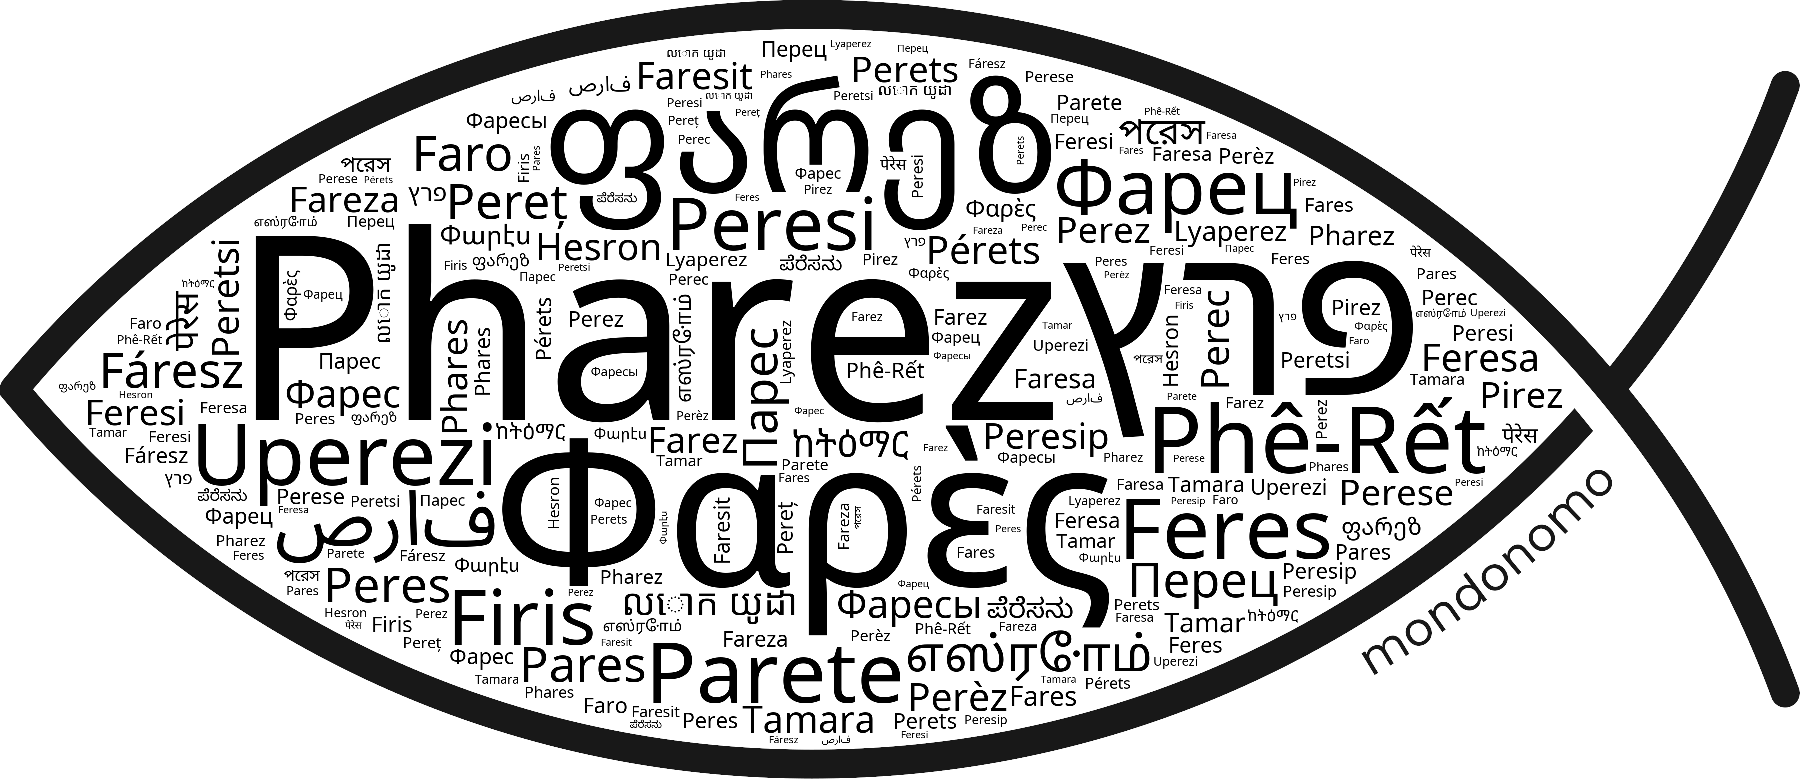 Name Pharez in the world's Bibles